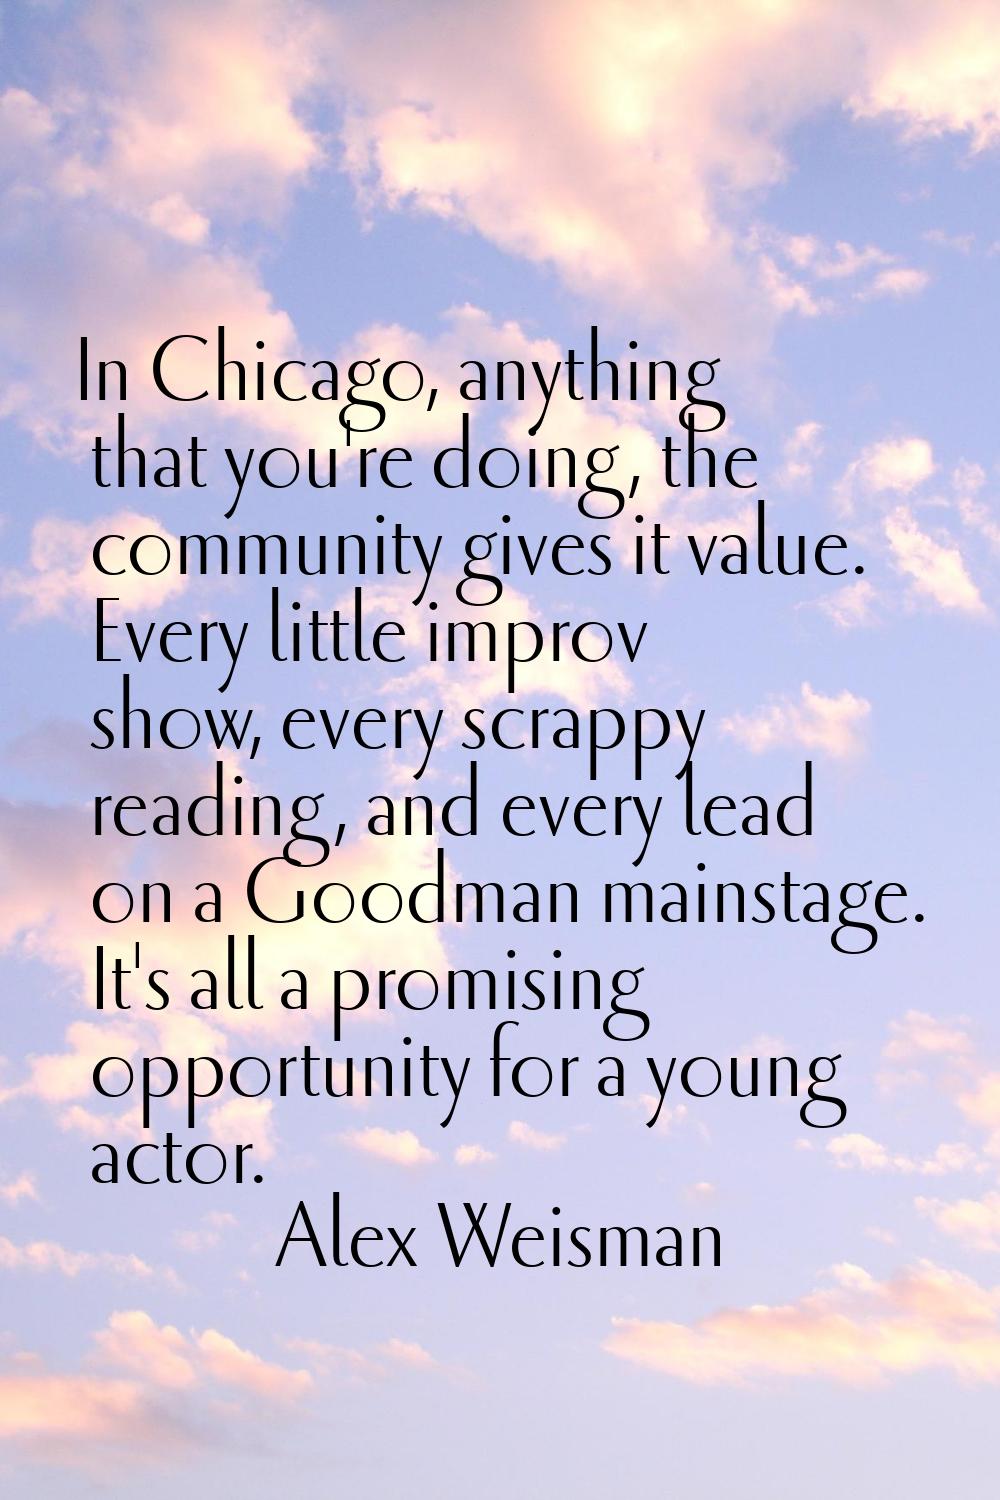 In Chicago, anything that you're doing, the community gives it value. Every little improv show, eve